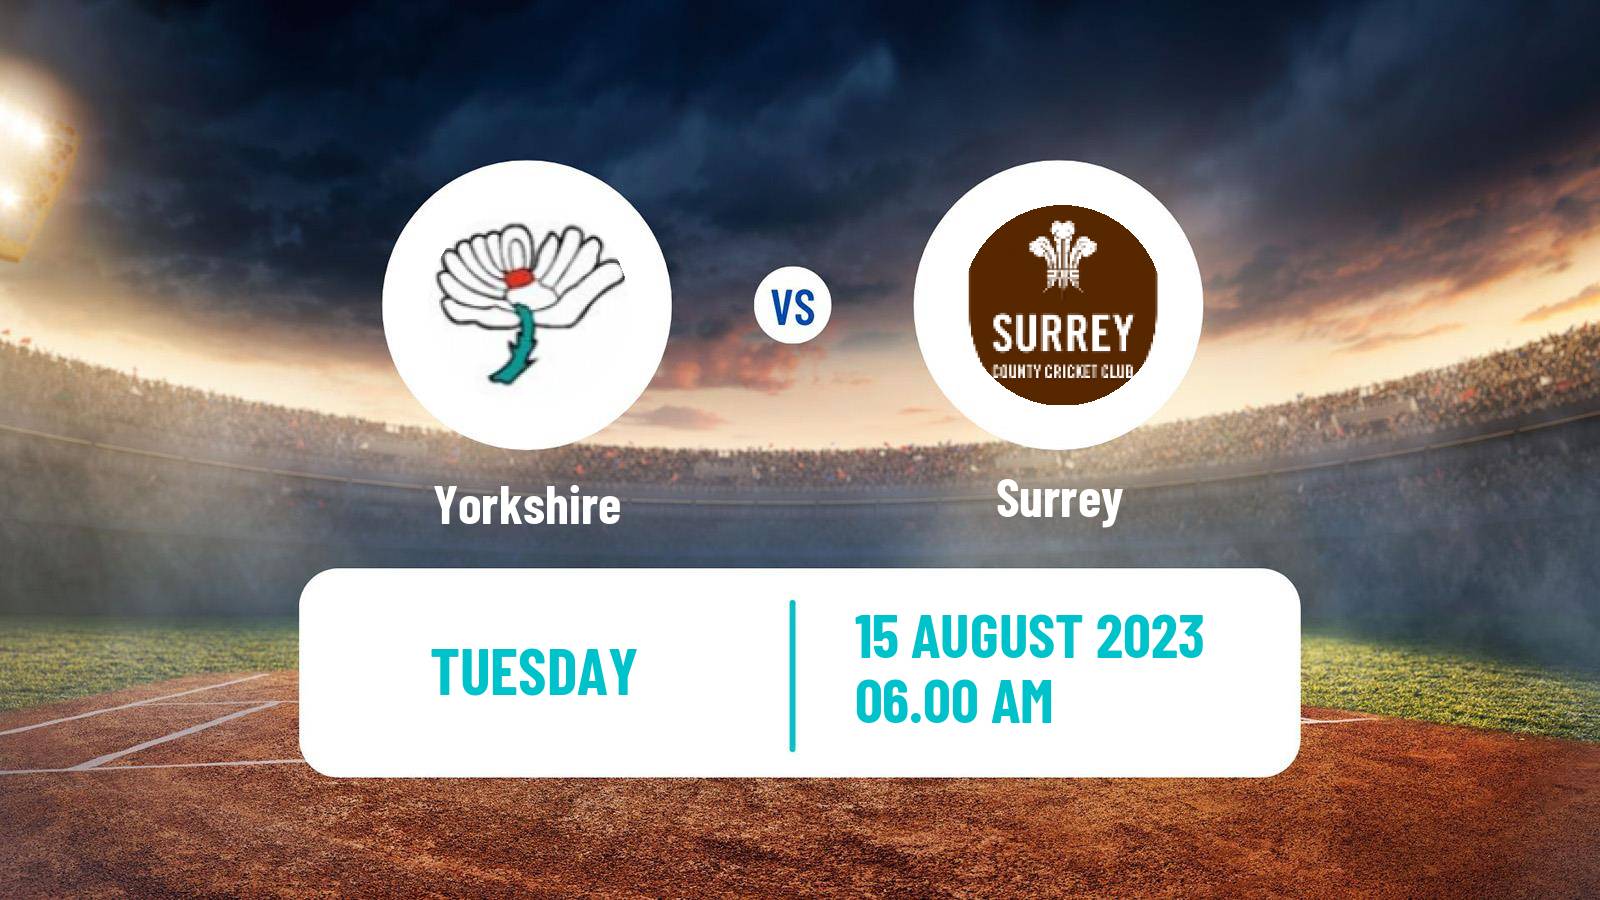 Cricket Royal London One-Day Cup Yorkshire - Surrey